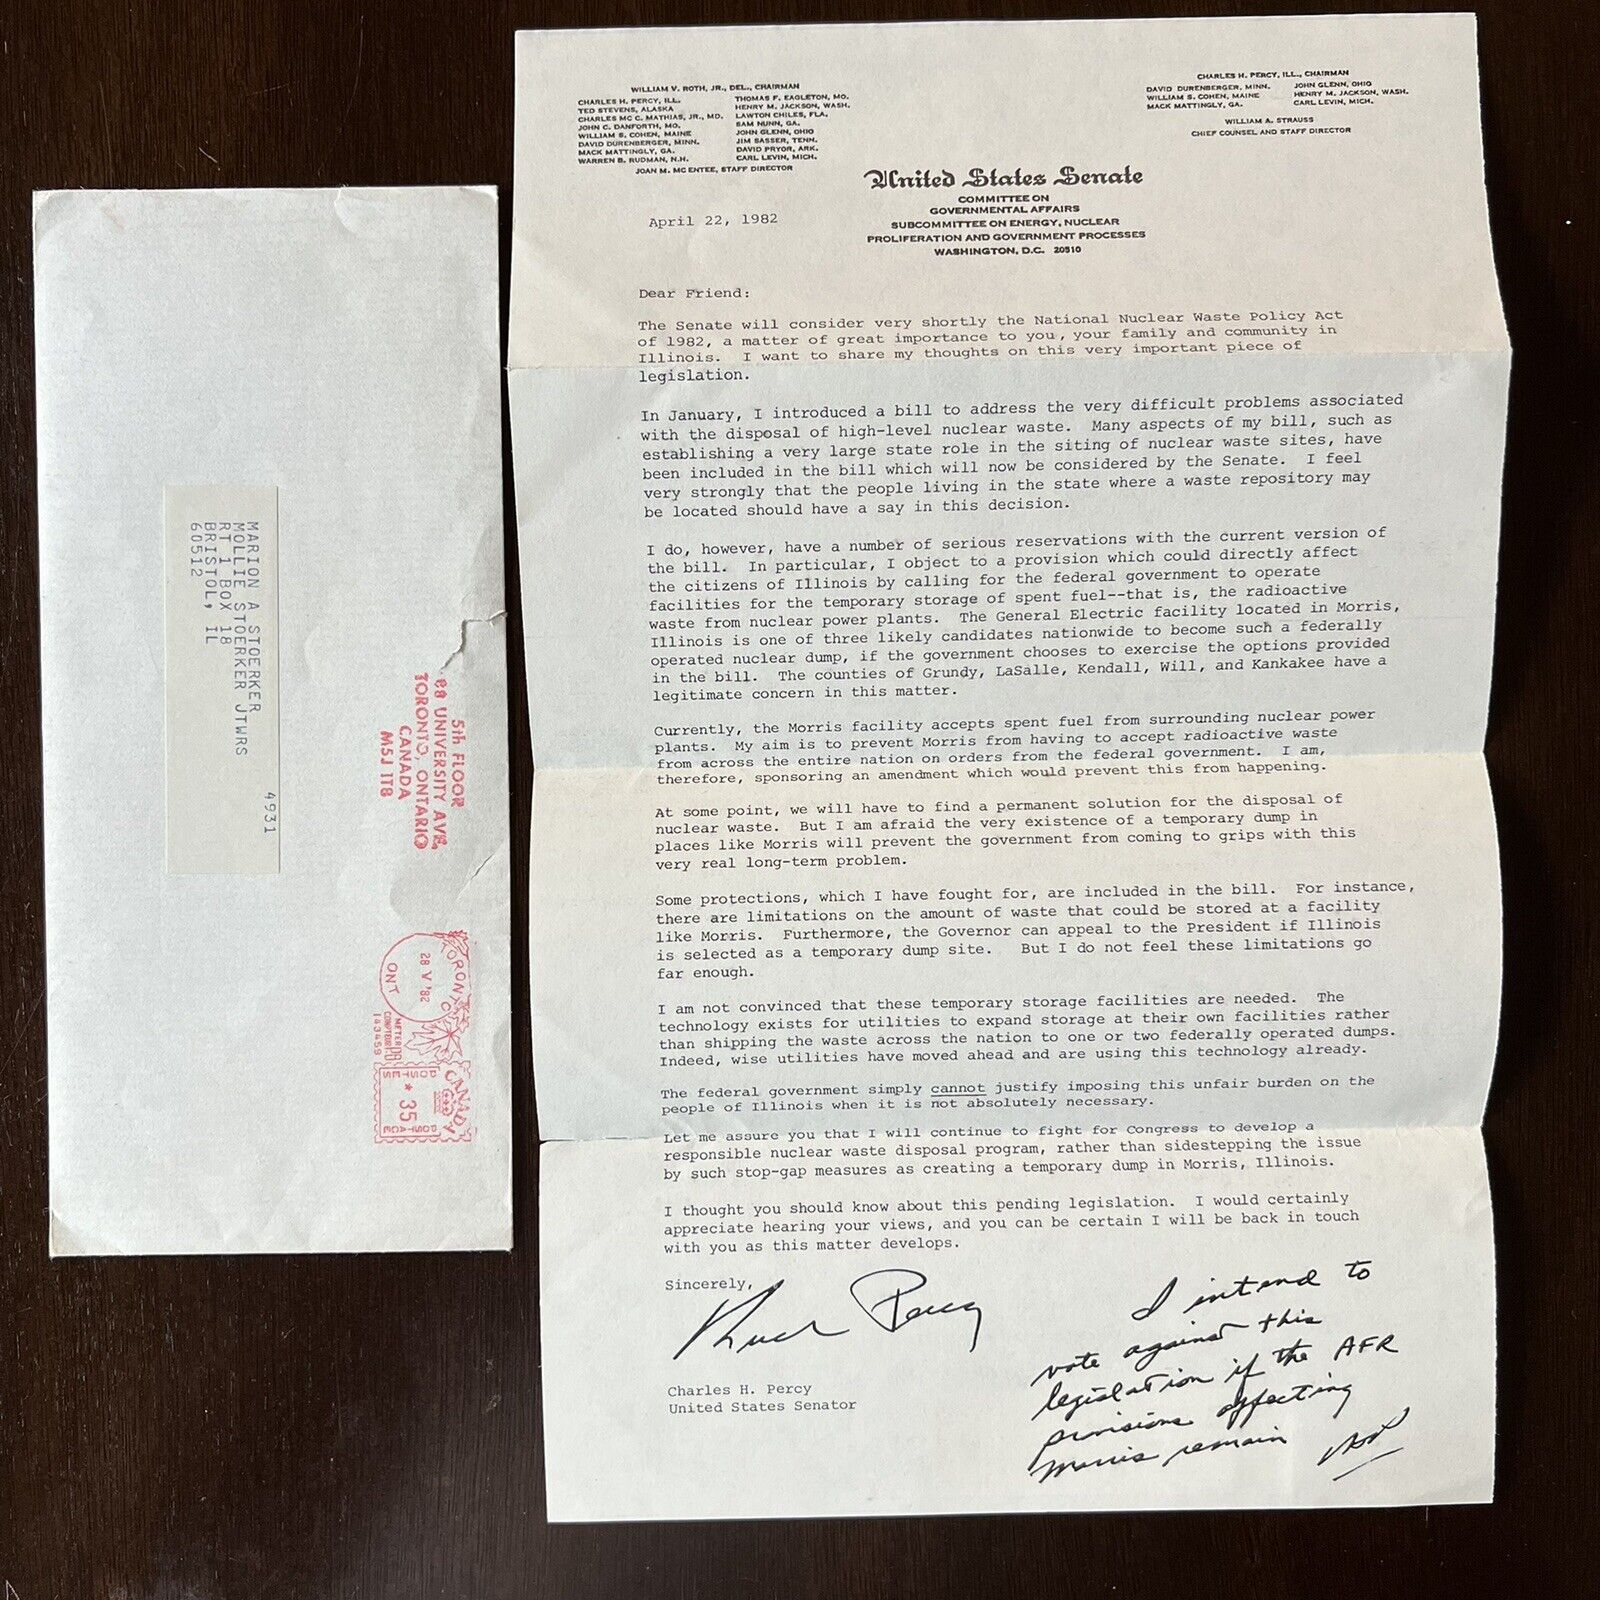 1982 US SENATE NUCLEAR ENERGY SUBCOMMITTEE SIGNED LETTER CHARLES PERCY ILLINOIS